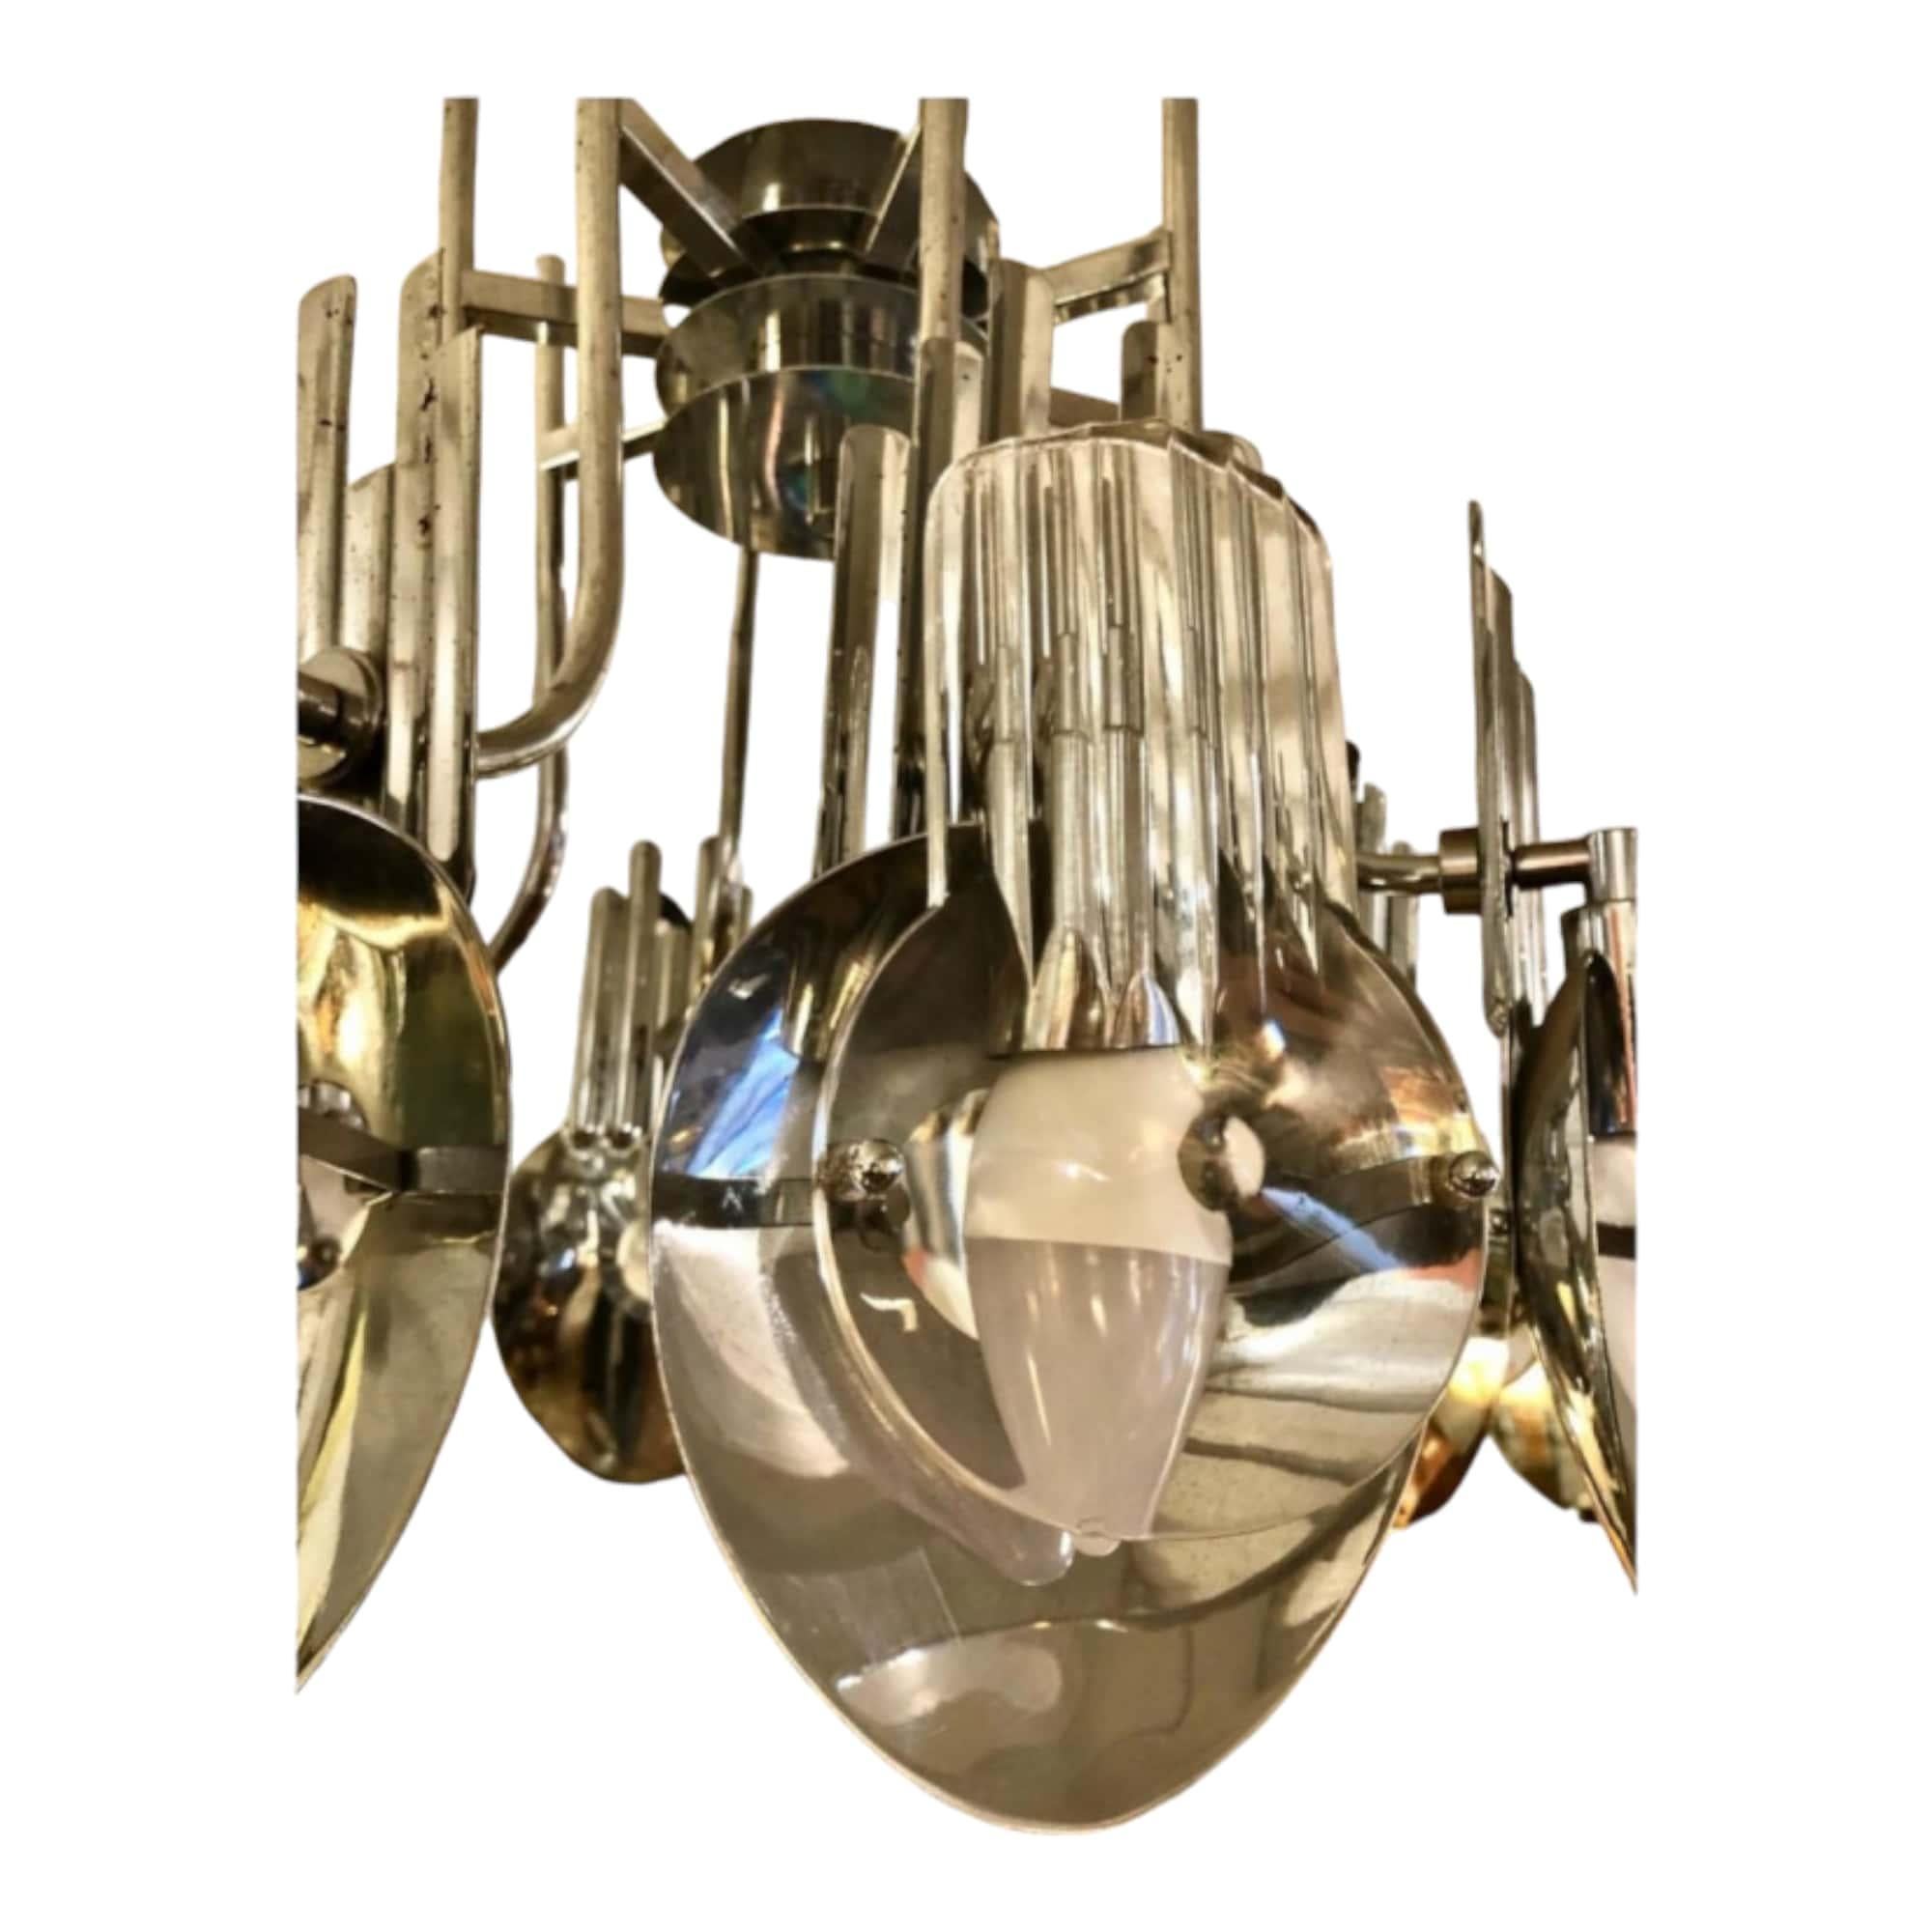 Discover this Oscar Torlasco's magnificent 8-light chandelier, a true masterpiece of Italian design. This stunning Italian antique, designed circa 1970, will bring a touch of elegance and sophistication to any space.

The chandelier features eight